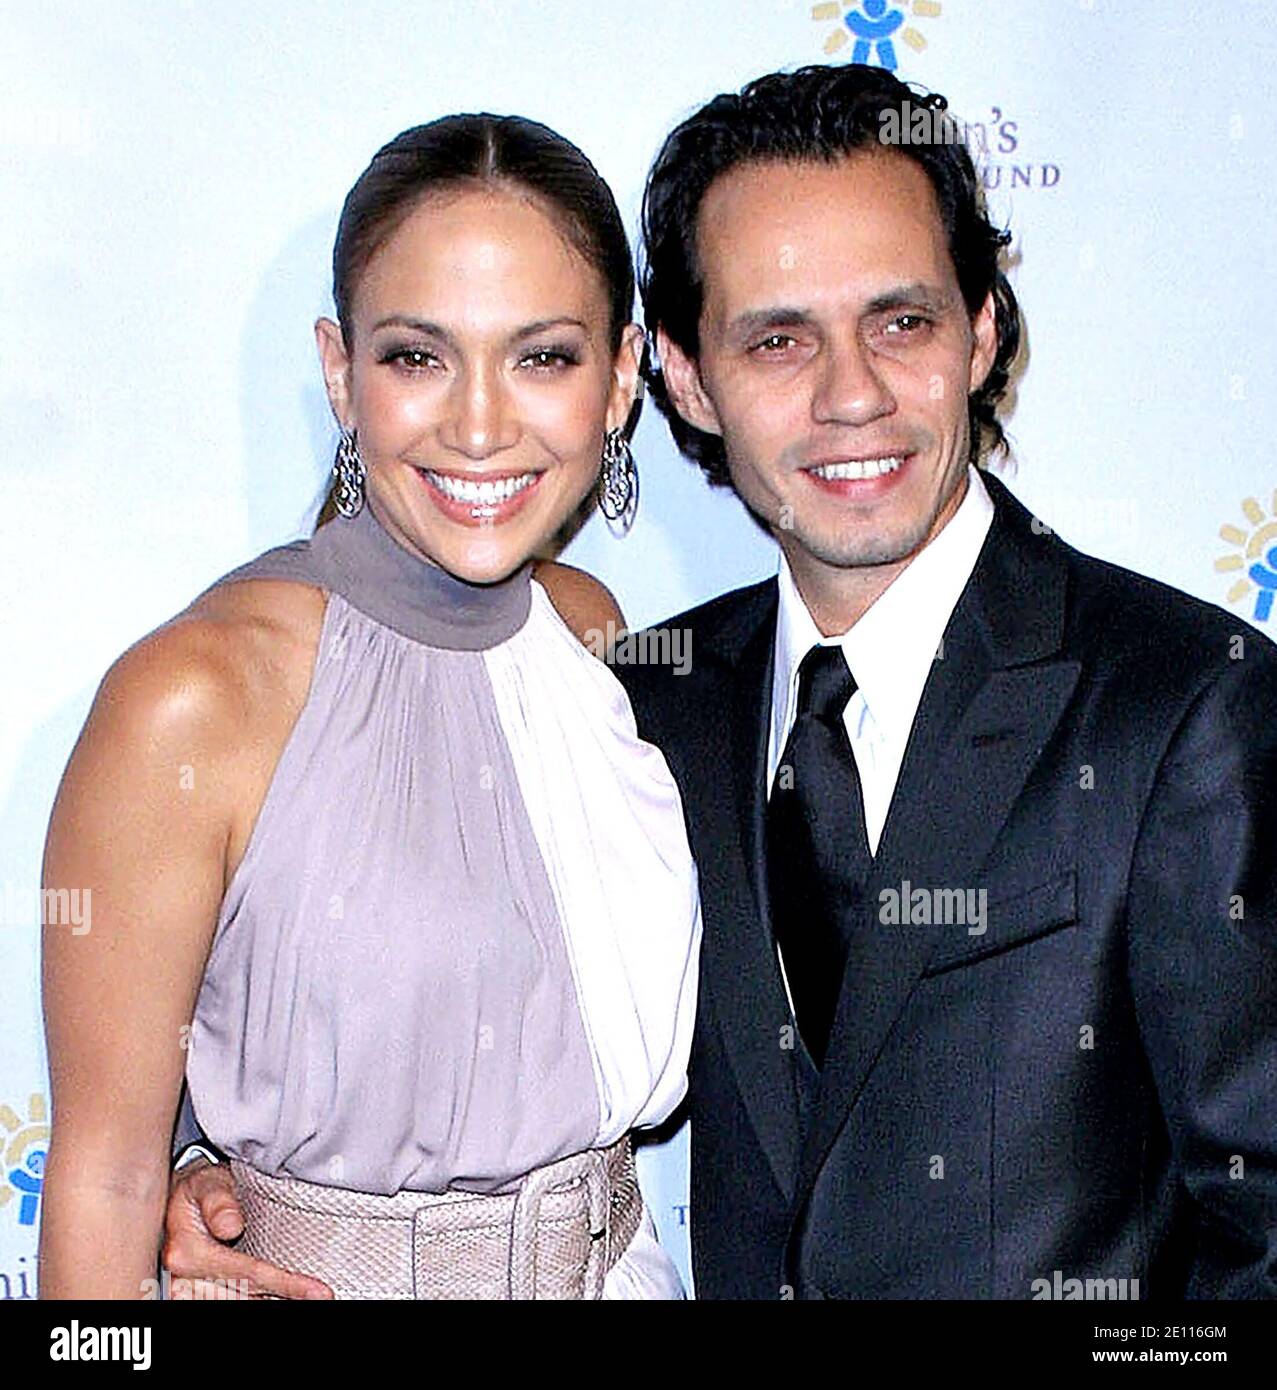 LOS ANGELES, CA. April 20, 2009: Steve Lopez & wife at the Los